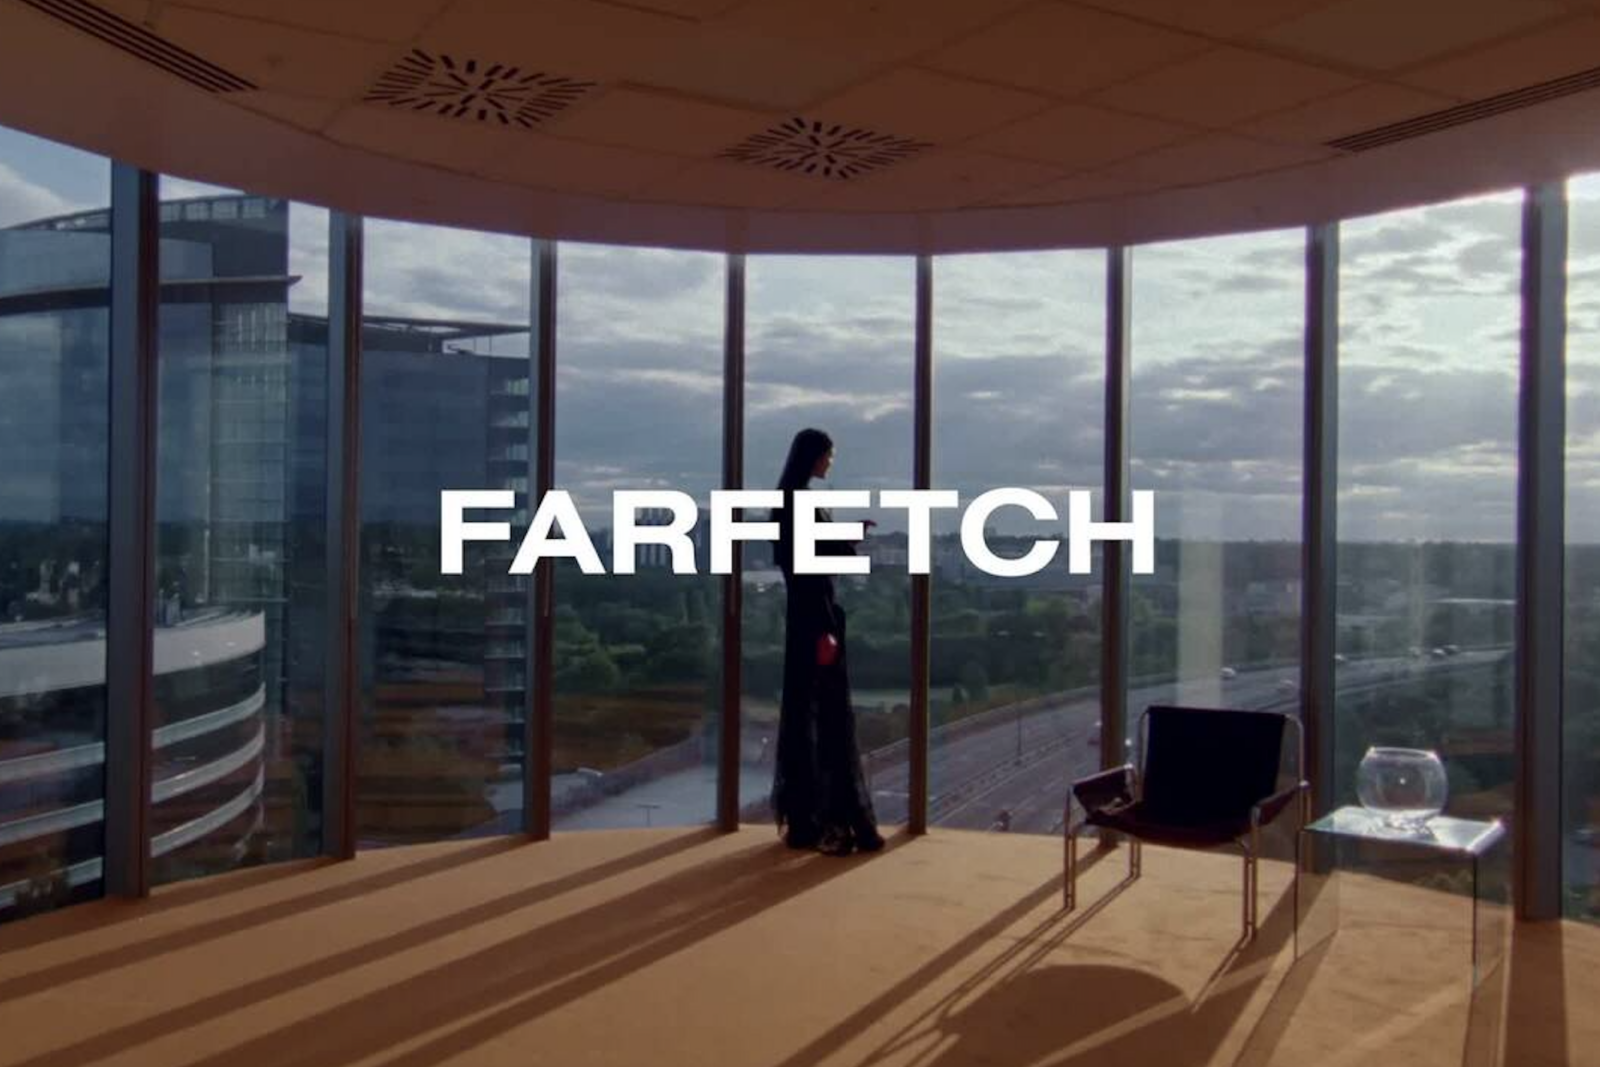 Korea Retailer Coupang to Acquire Ailing Farfetch in $500M Deal – The Fashion Law